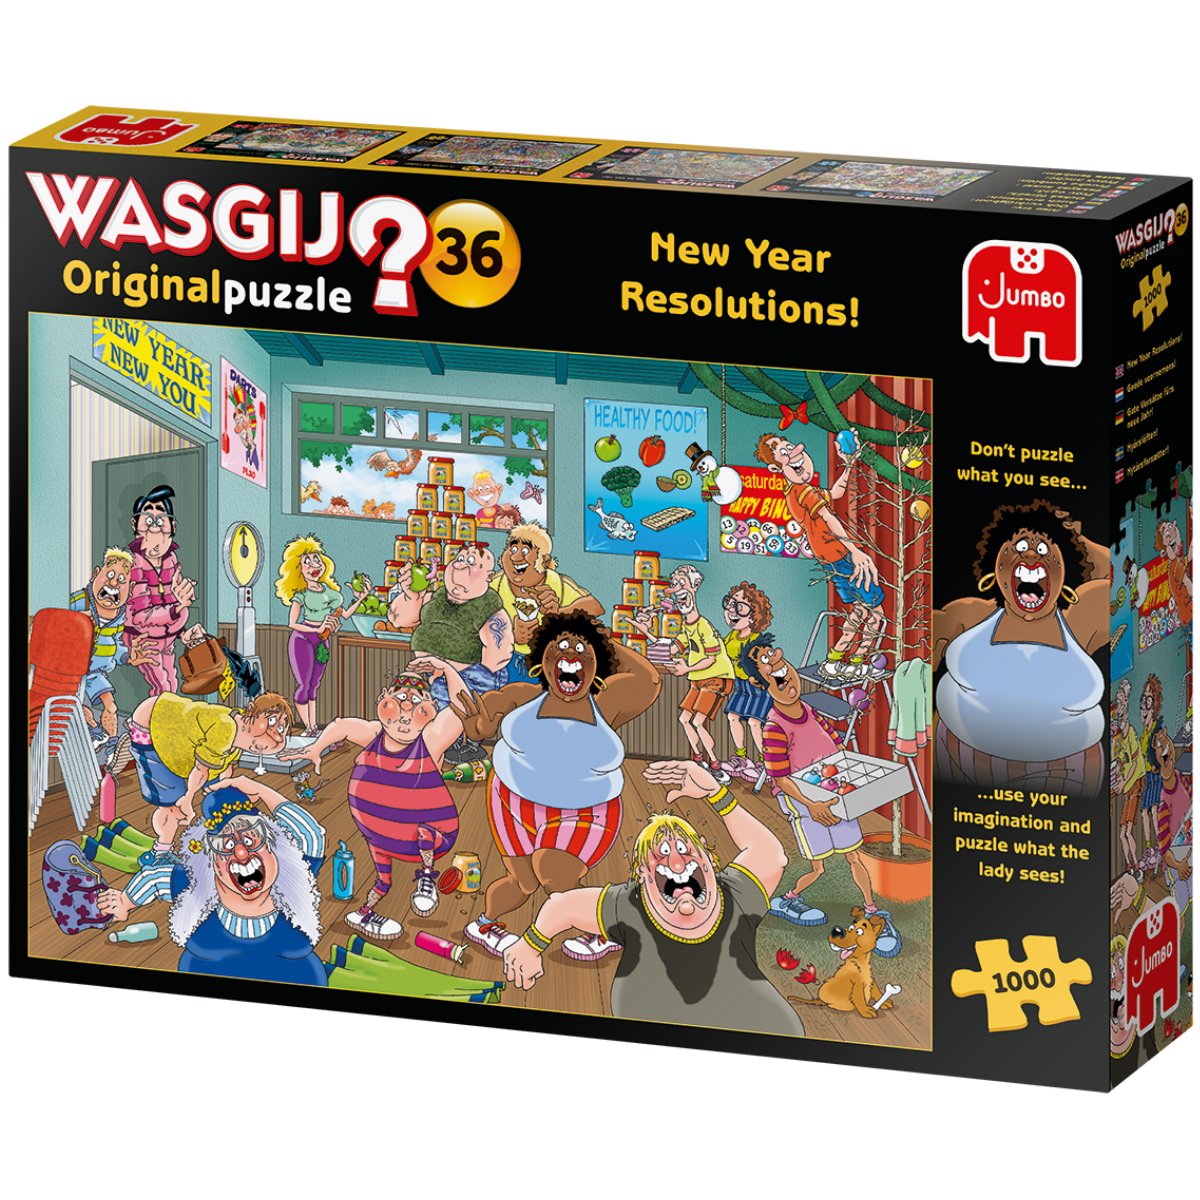 Wasgij Original 36 New Year Resolutions! Jigsaw Puzzle (1000 Pieces) - Phillips Hobbies